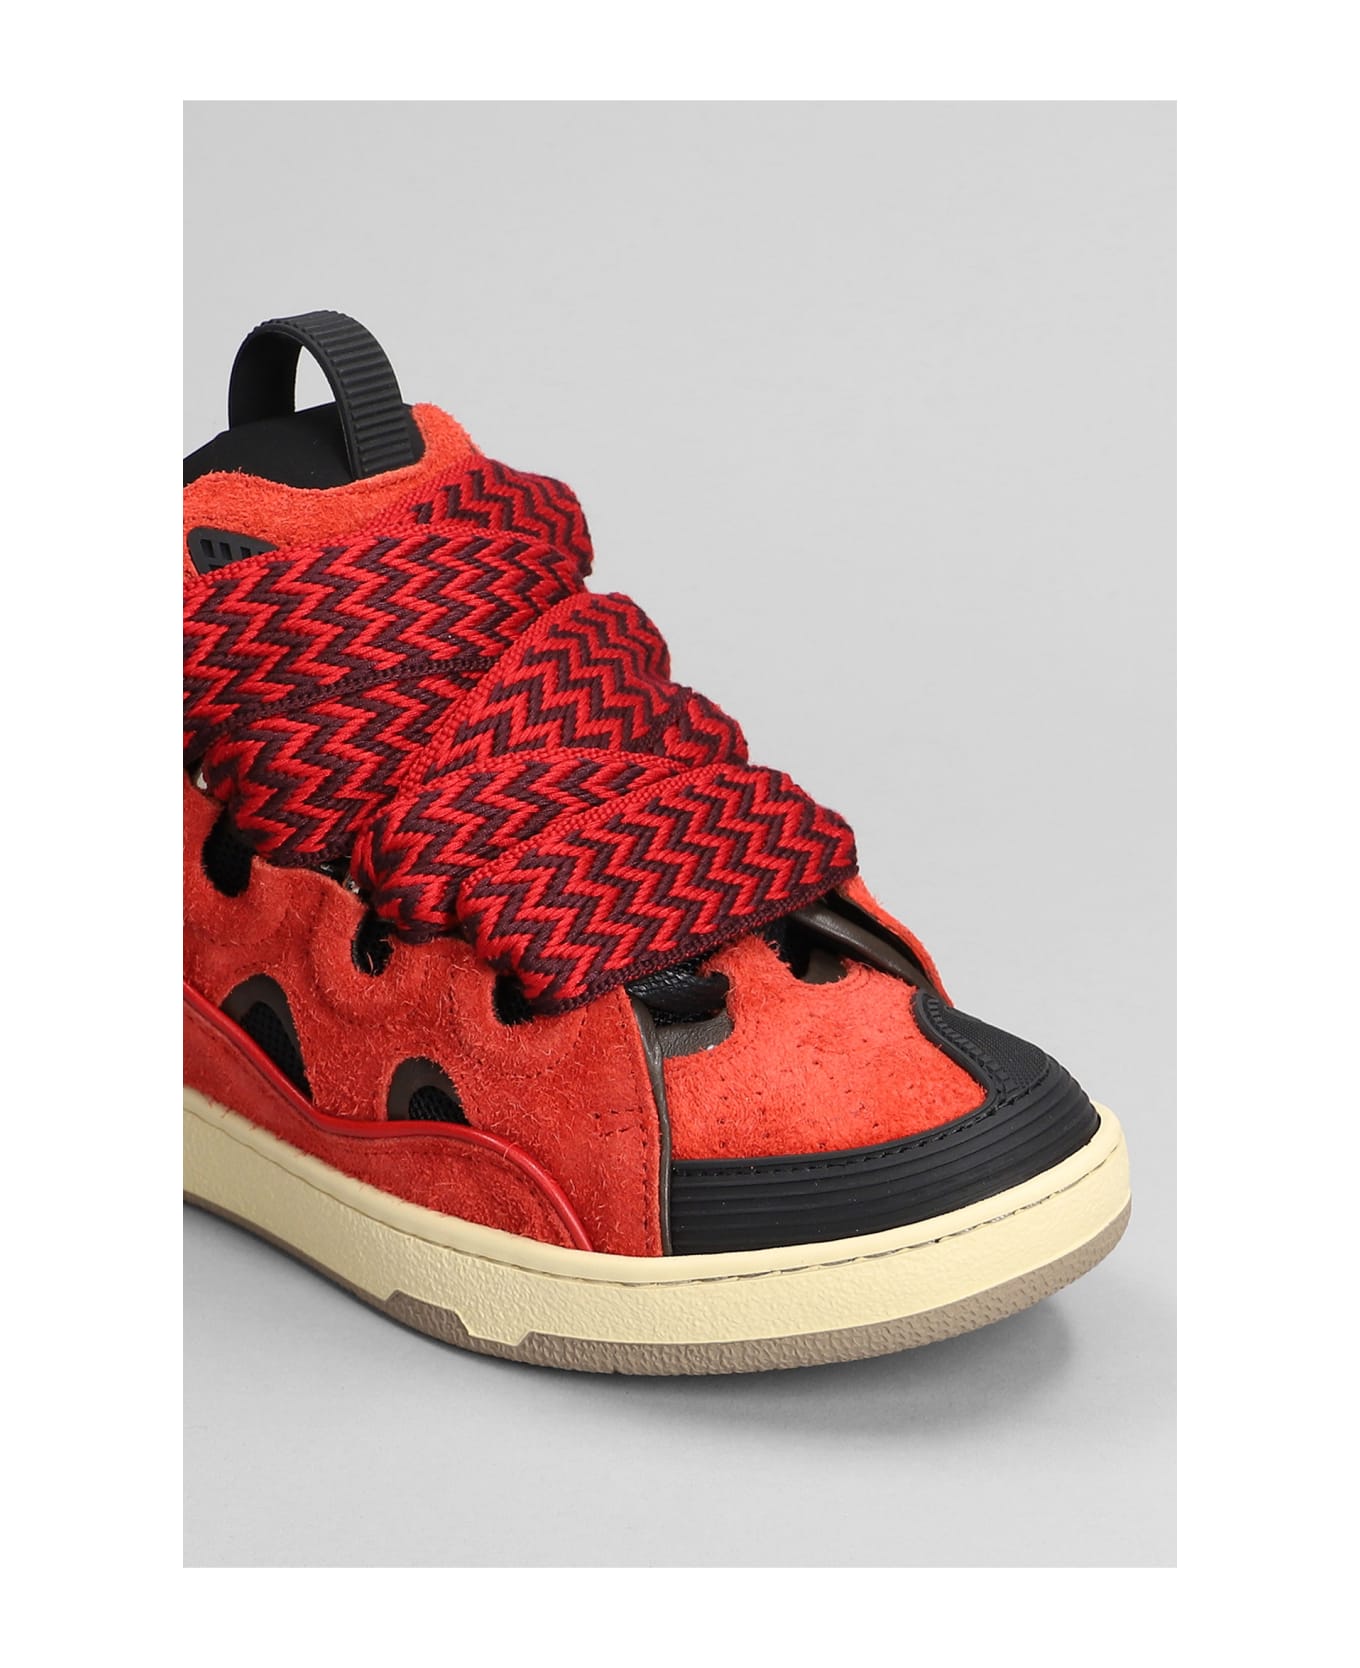 Lanvin Curb Sneakers In Red Suede - red